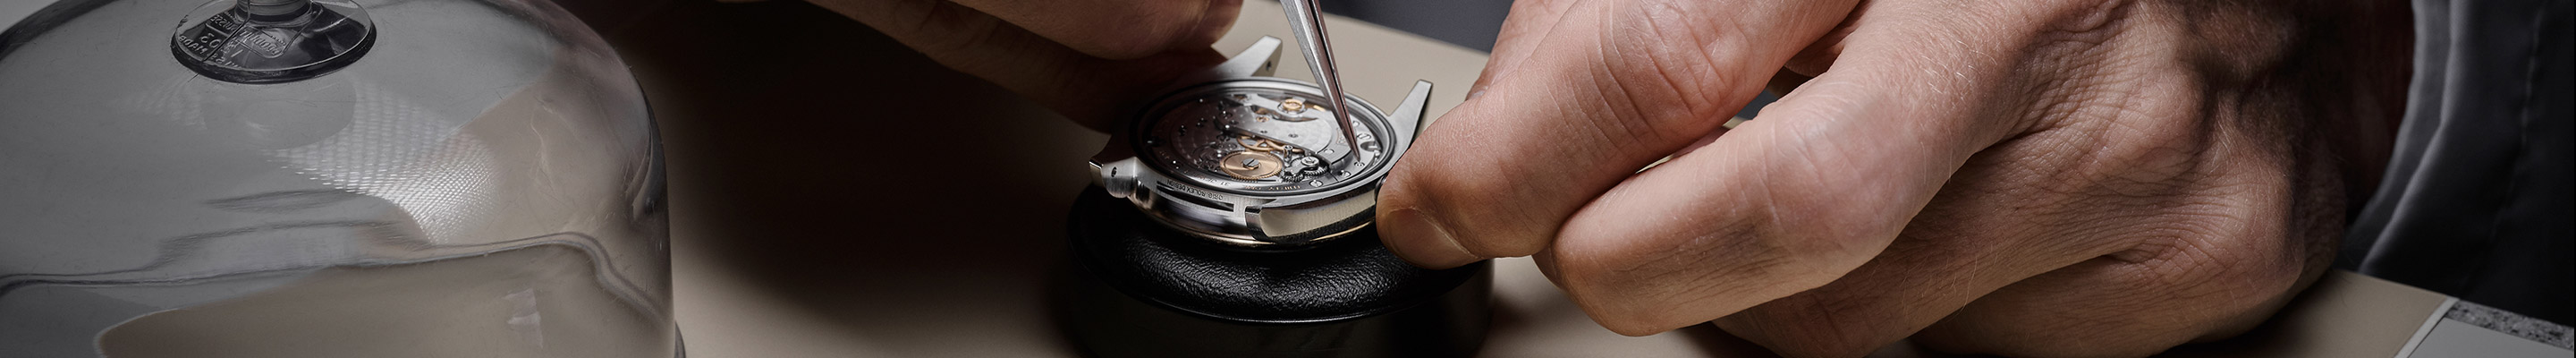 ROLEX WATCH SERVICING AND REPAIR AT ROLEX AT FOURTANE